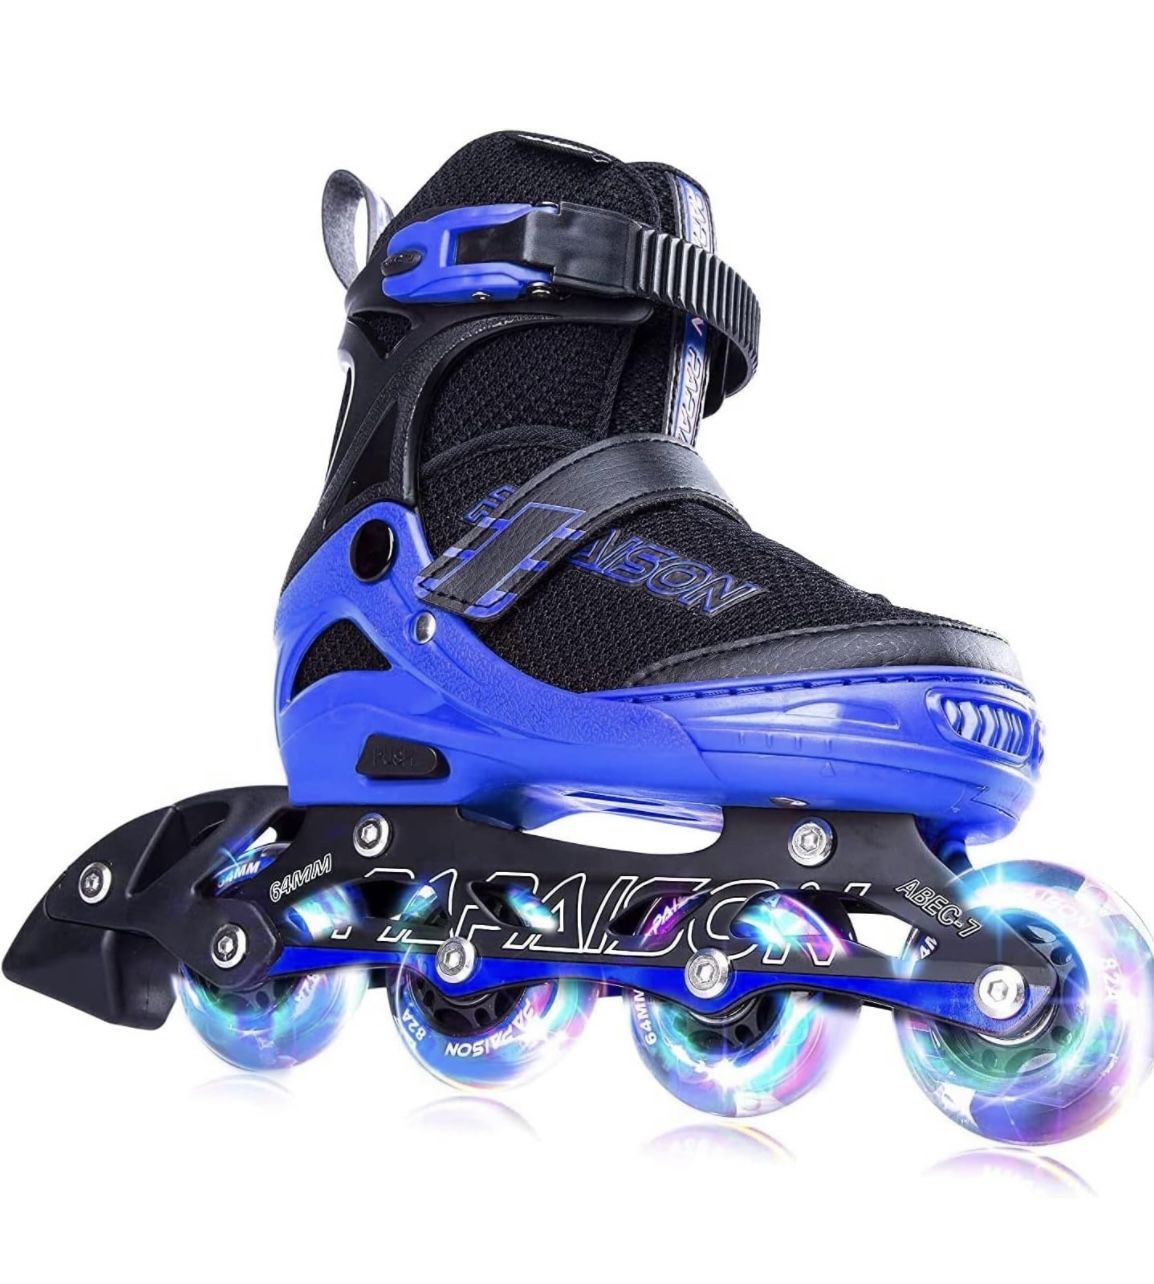 PAPAISON Adjustable Inline Skates for Adults with Full Light